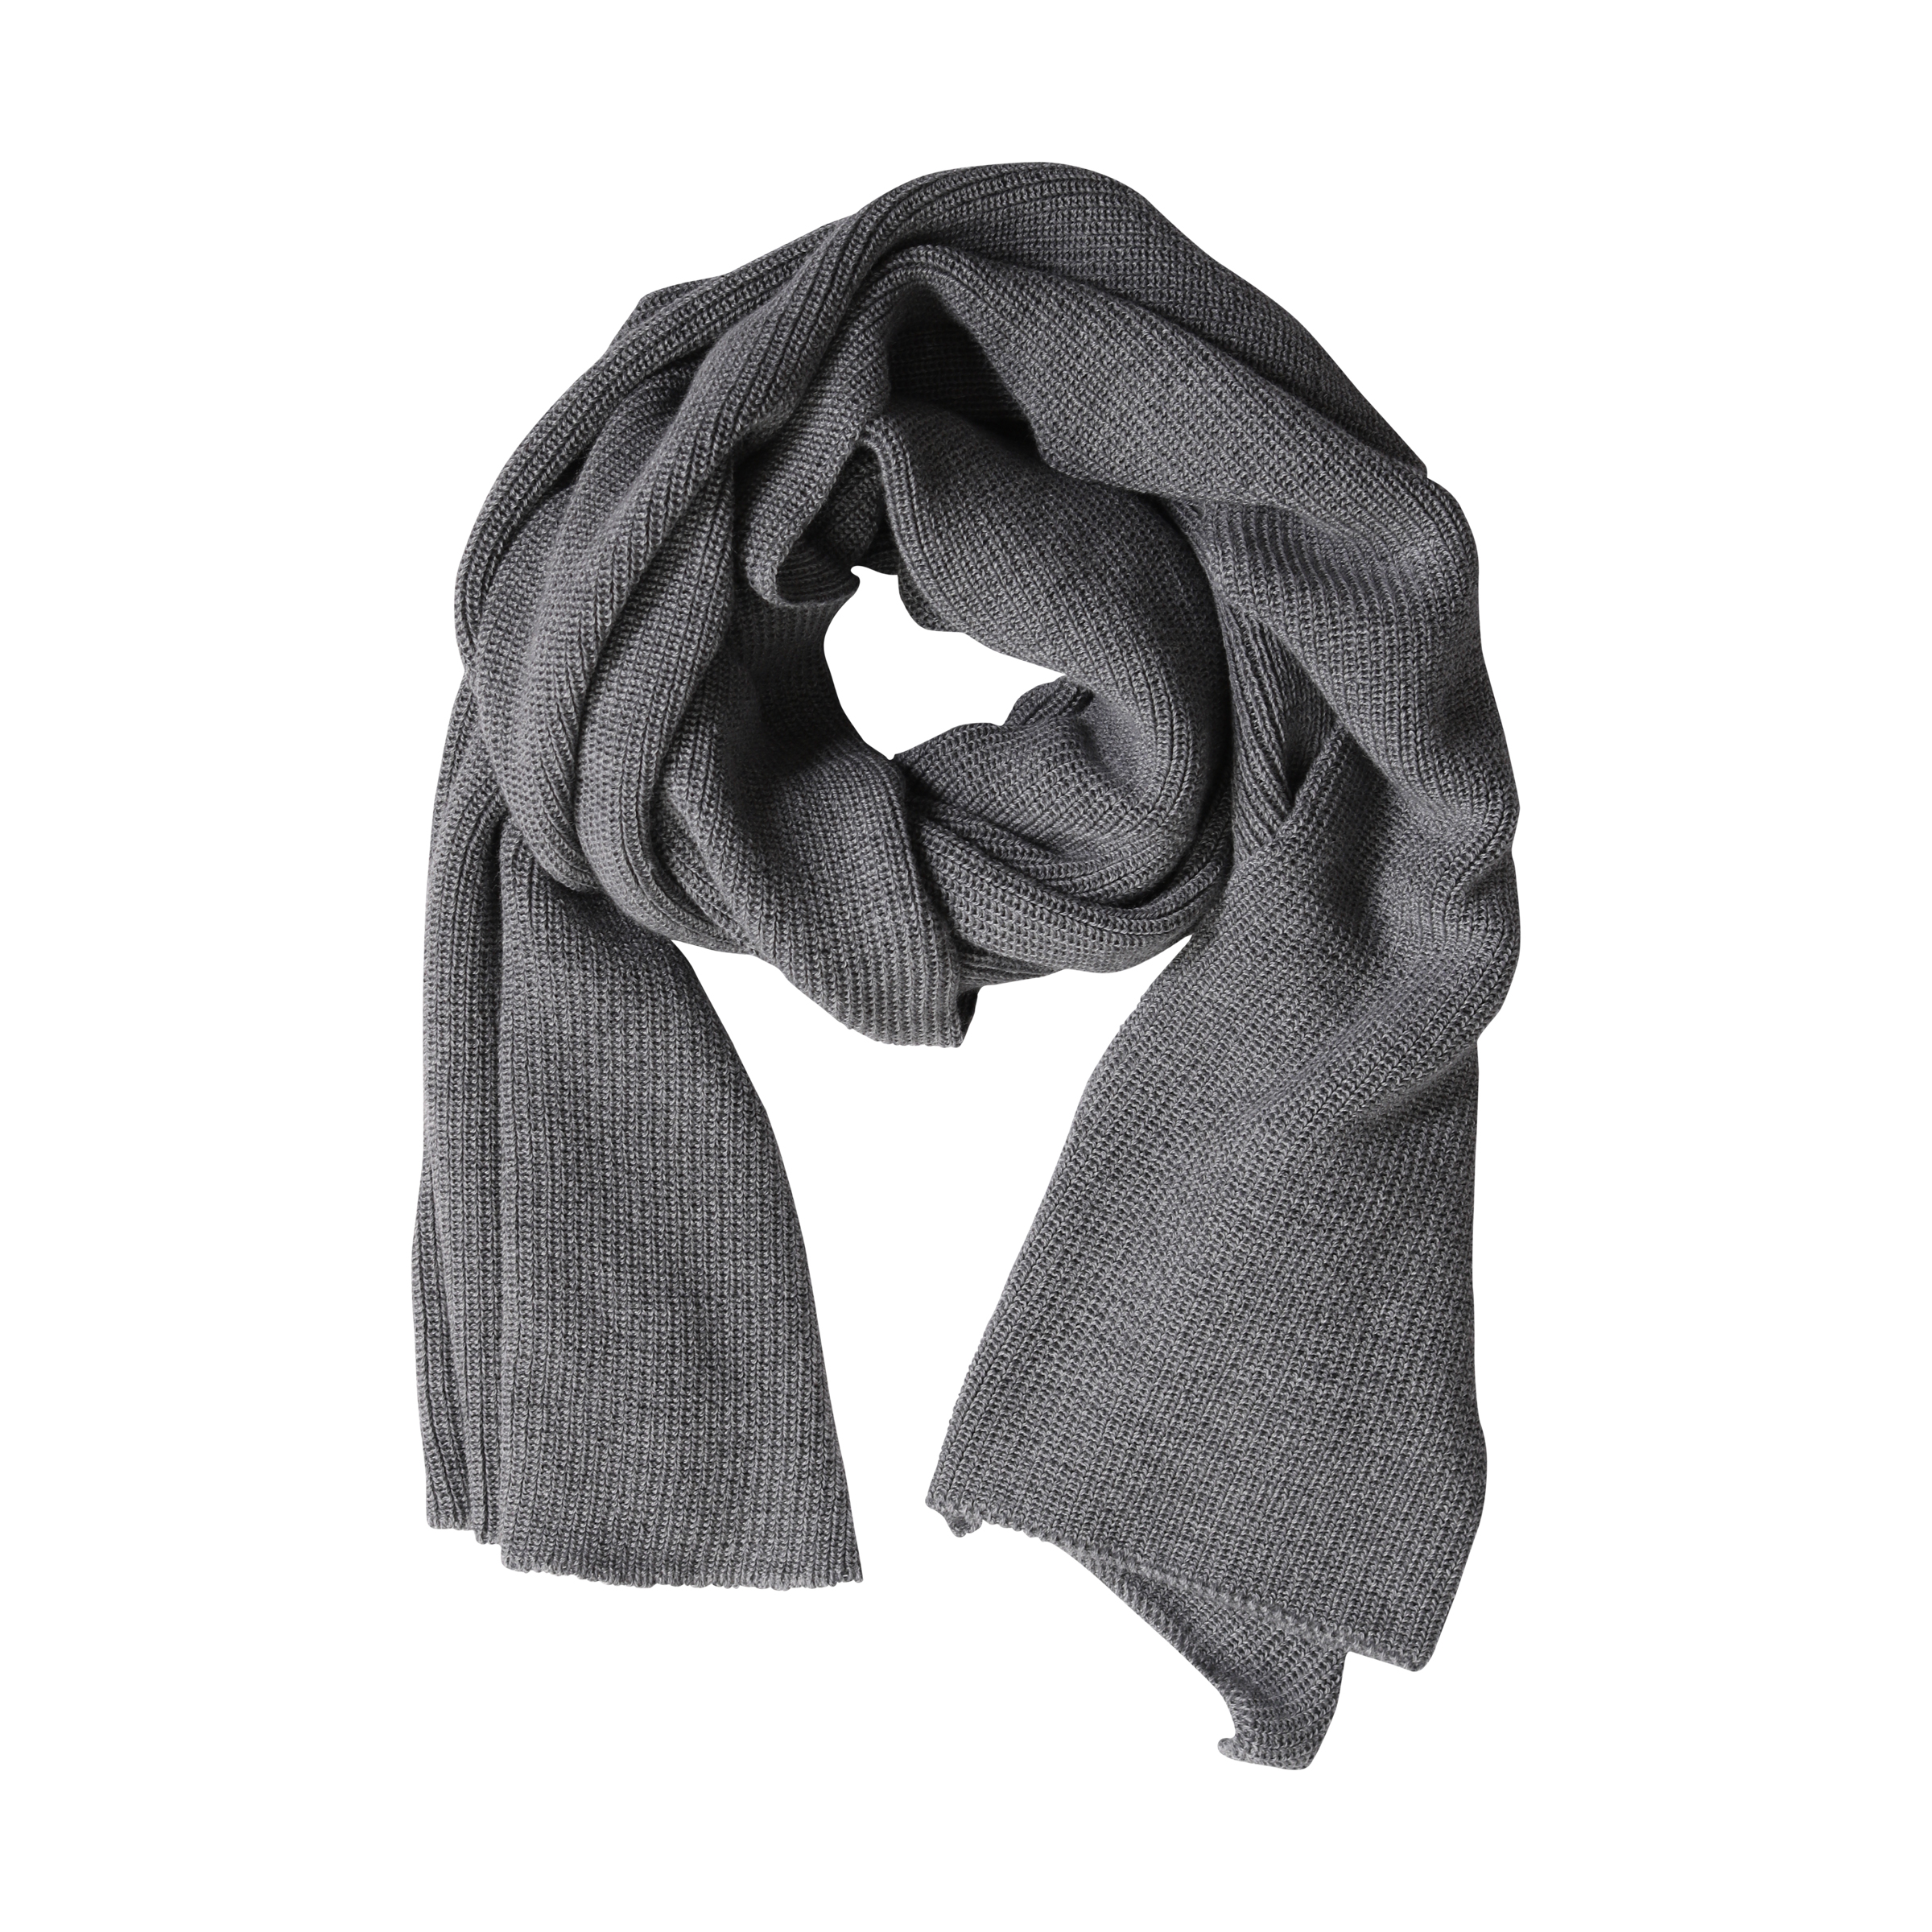 HANNES ROETHER Knit Scarf in Grey